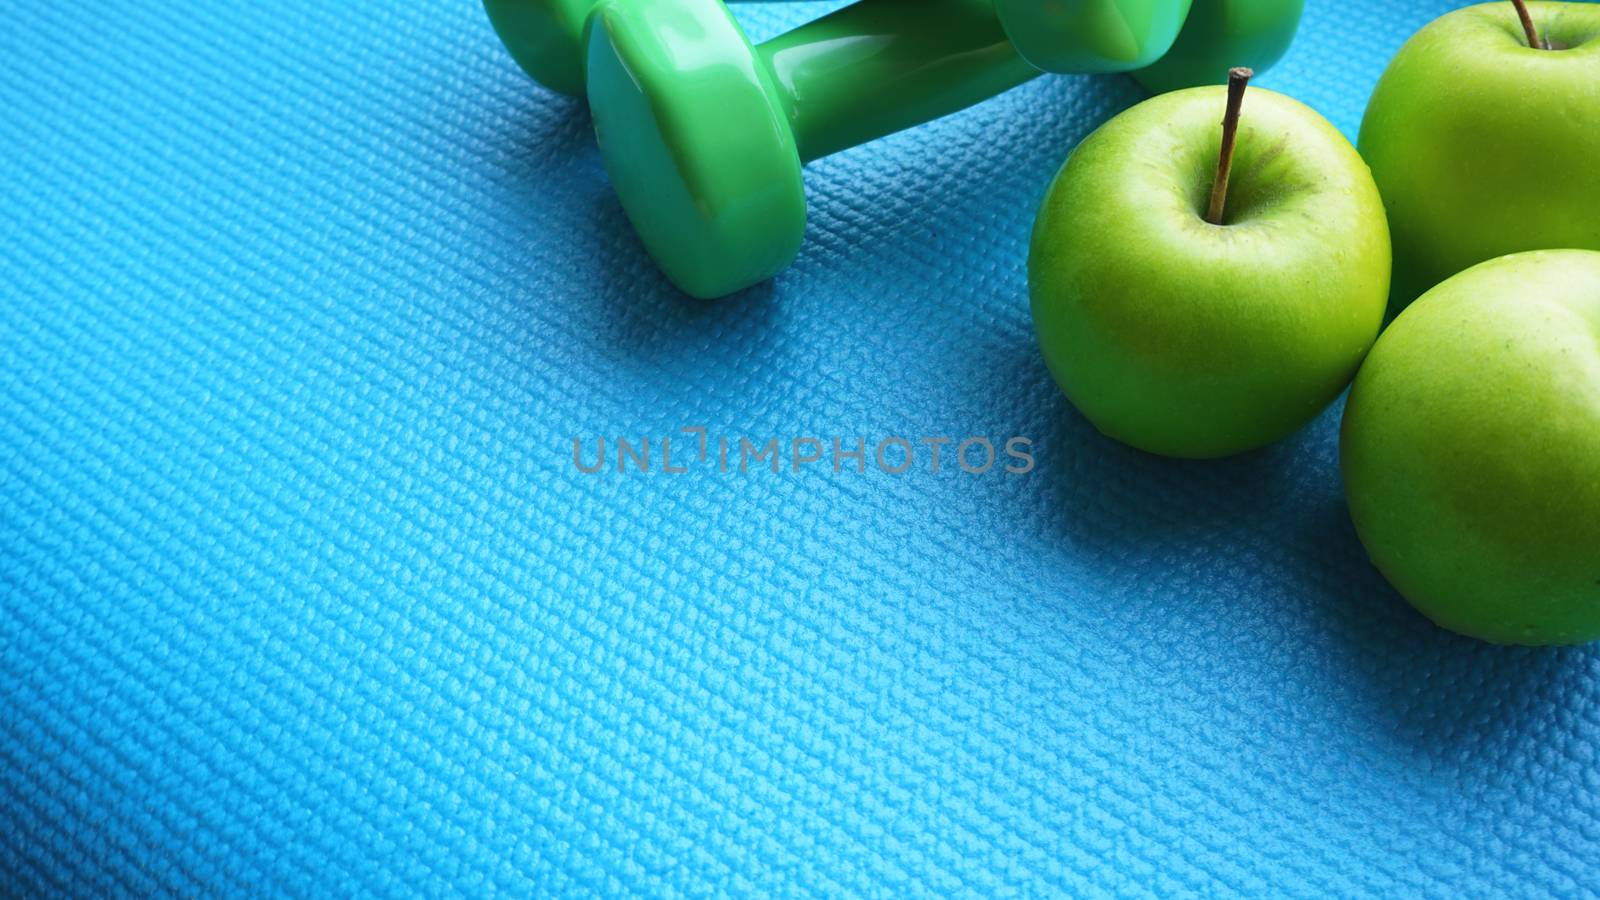 Dumbbells near green apples blue background. Healthy lifestyle and sport concept by natali_brill